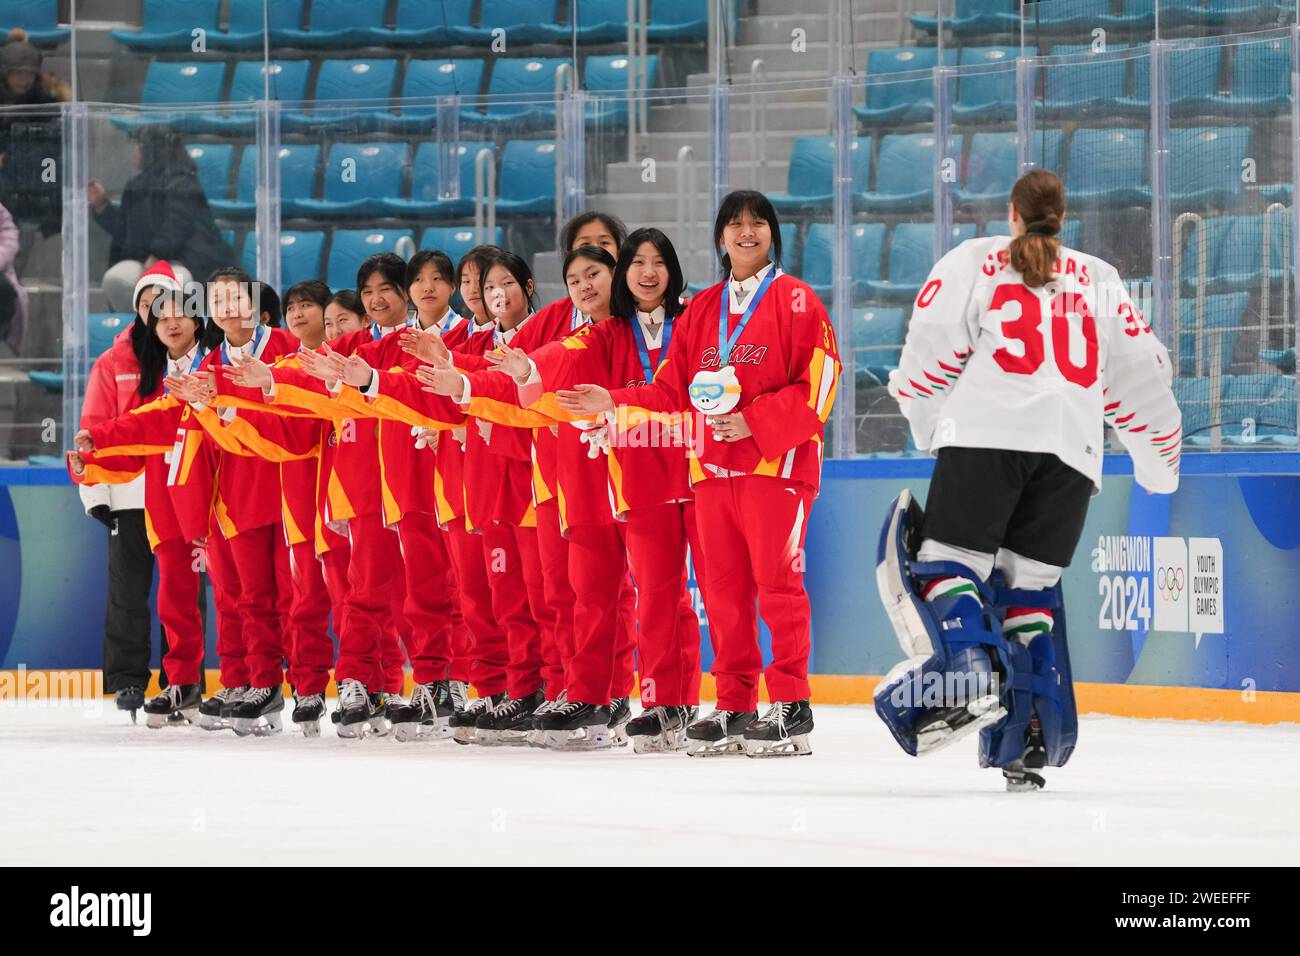 Gangneung, South Korea. 25th Jan, 2024. Players of team China congratulate Csenge Csordas of team Hungary during the victory ceremony for the Women's 3-on-3 Tournament of ice hockey event at the Gangwon 2024 Winter Youth Olympic Games in Gangneung, South Korea, Jan. 25, 2024. Credit: Zhang Xiaoyu/Xinhua/Alamy Live News Stock Photo